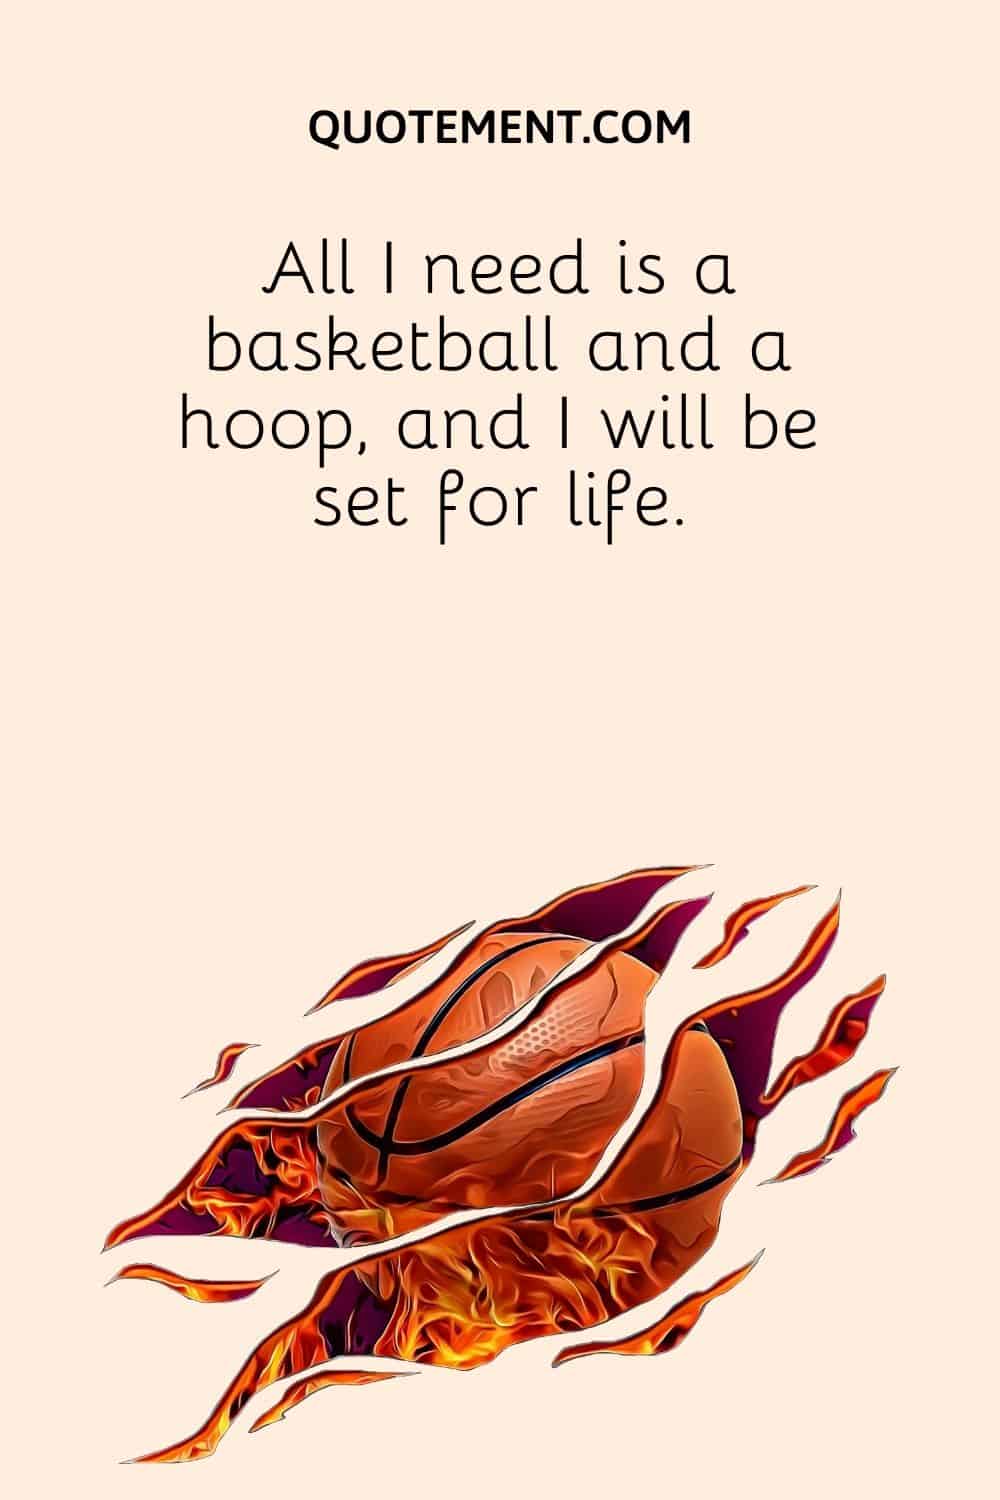 All I need is a basketball and a hoop,